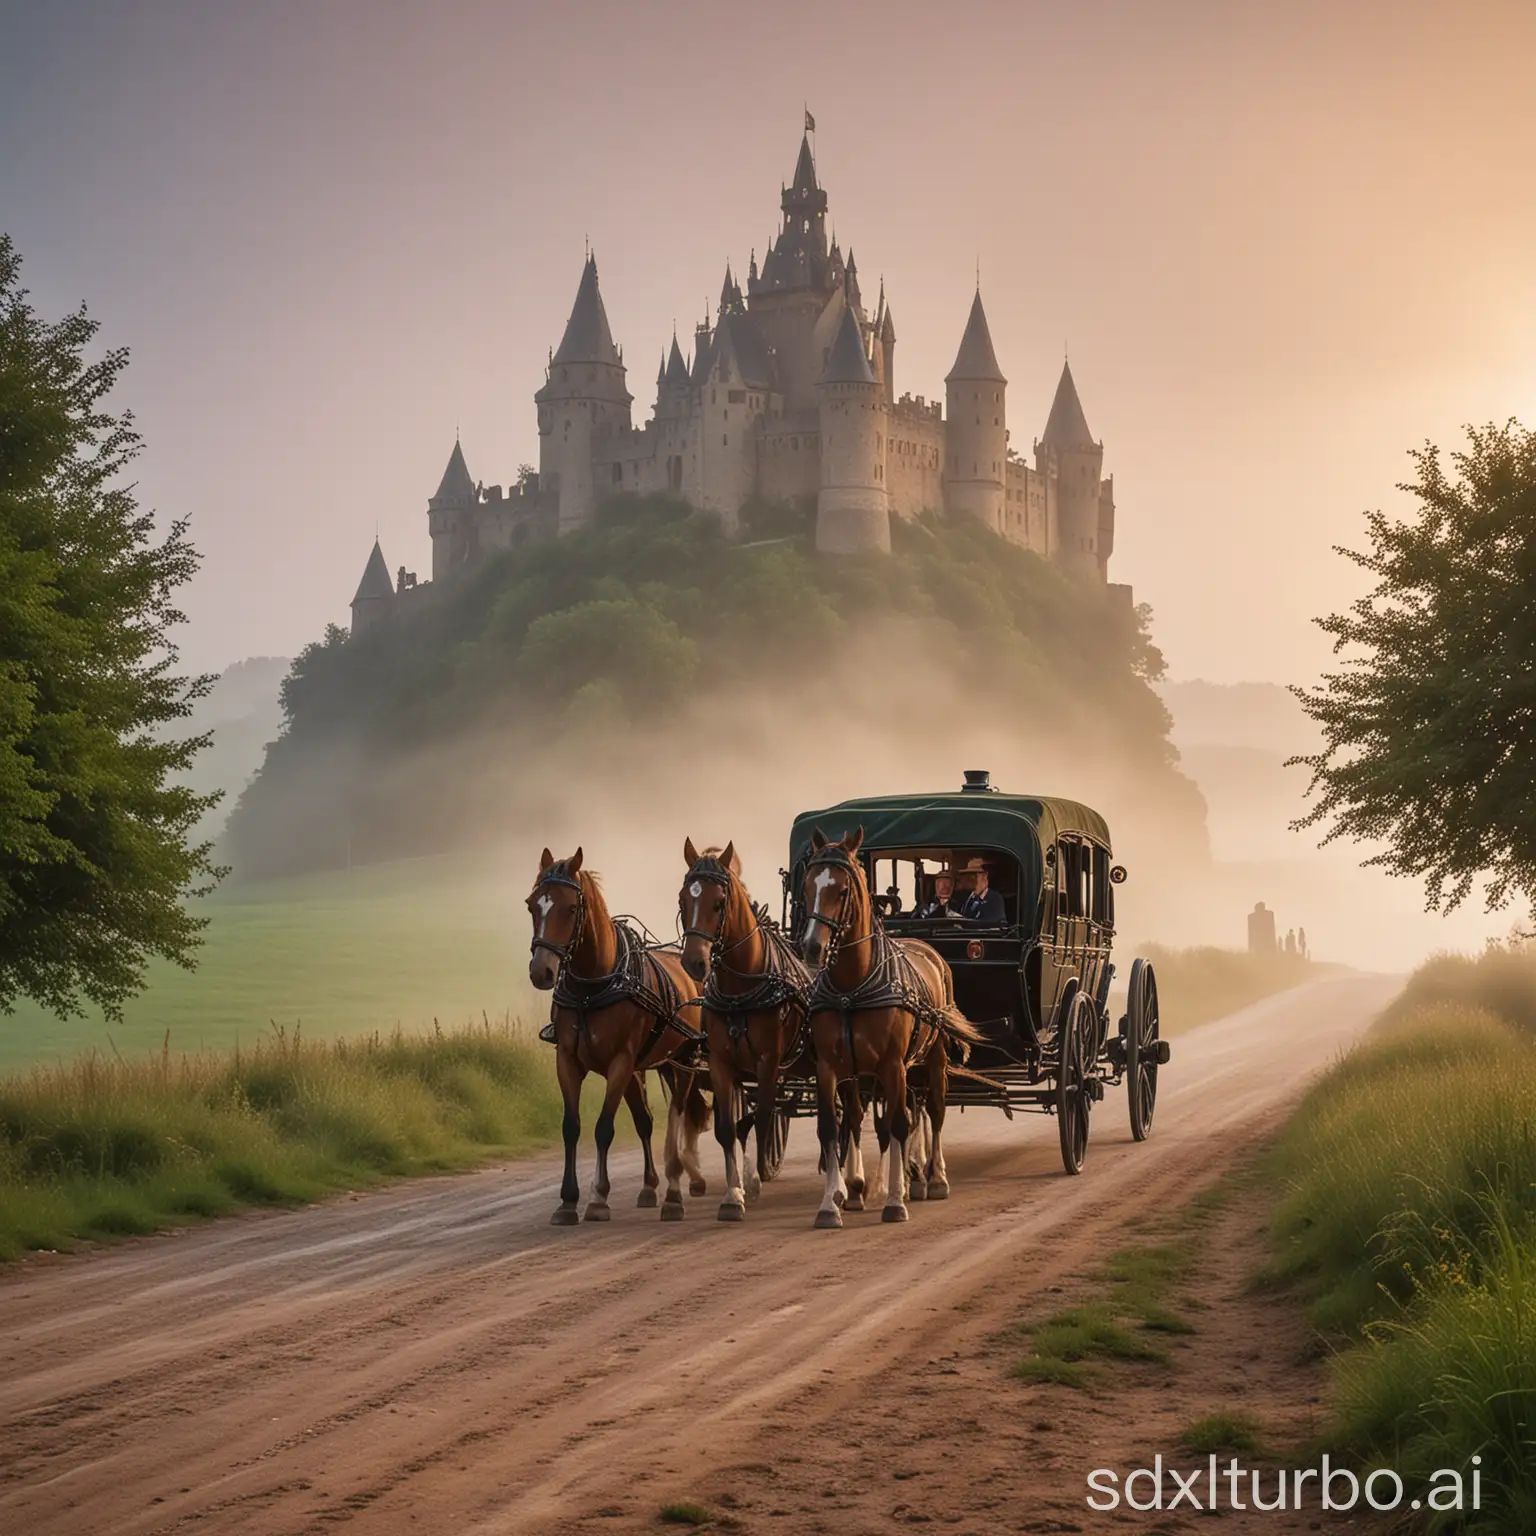 Rich European  beautiful covered carriage drawn by two horses in front of a coach driven by a coachman is driving at dusk on a dusty circular road around a hill covered with greenery towards an ancient castle on top of the hill and slightly covered by fog.